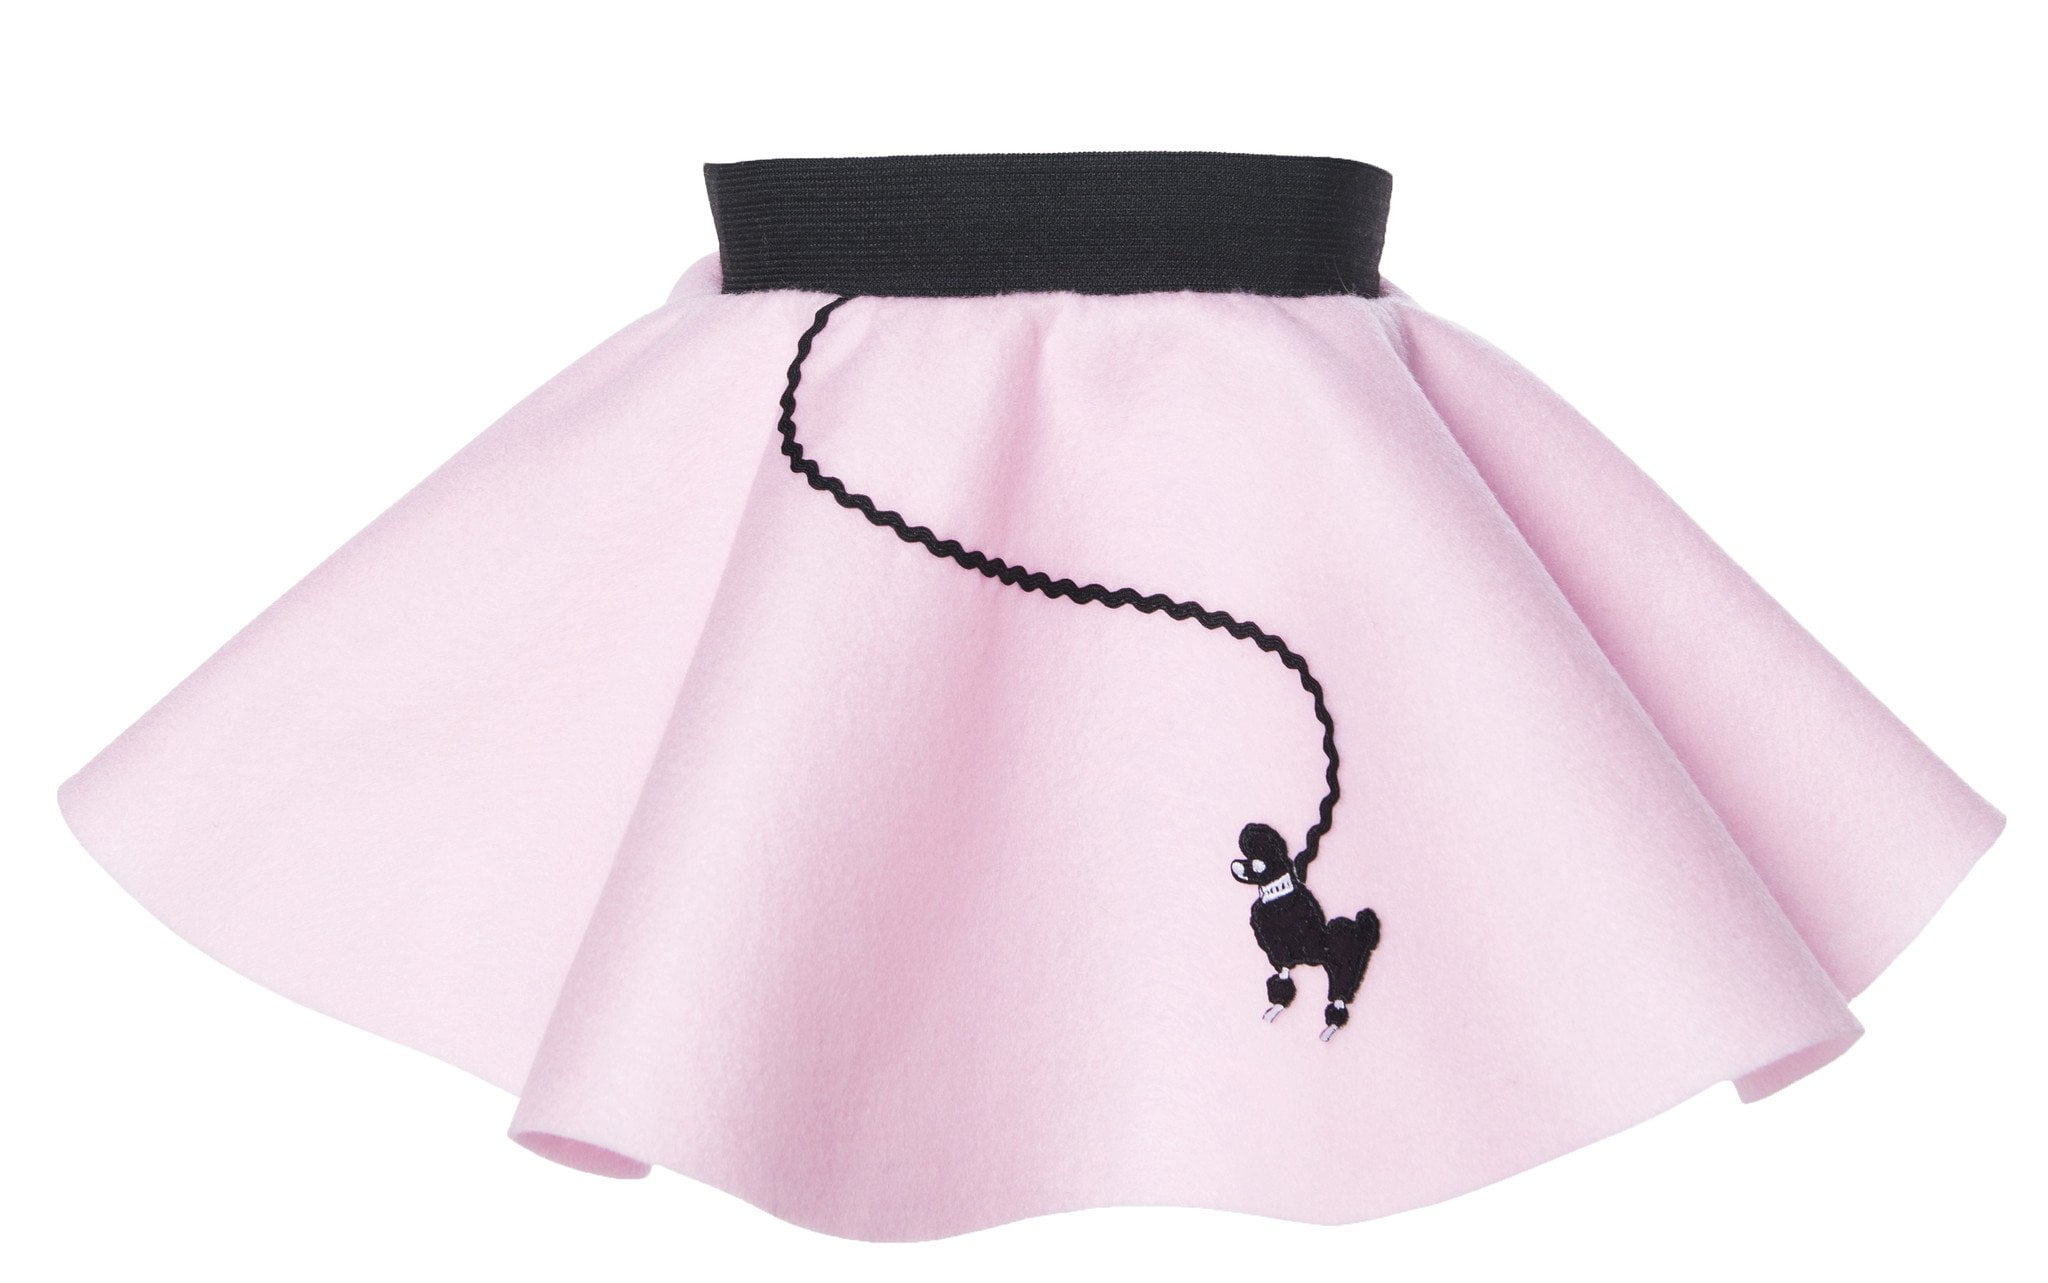 Magnificent Baby Girls Infant Poodle Tee and Skort Pink 18 Months